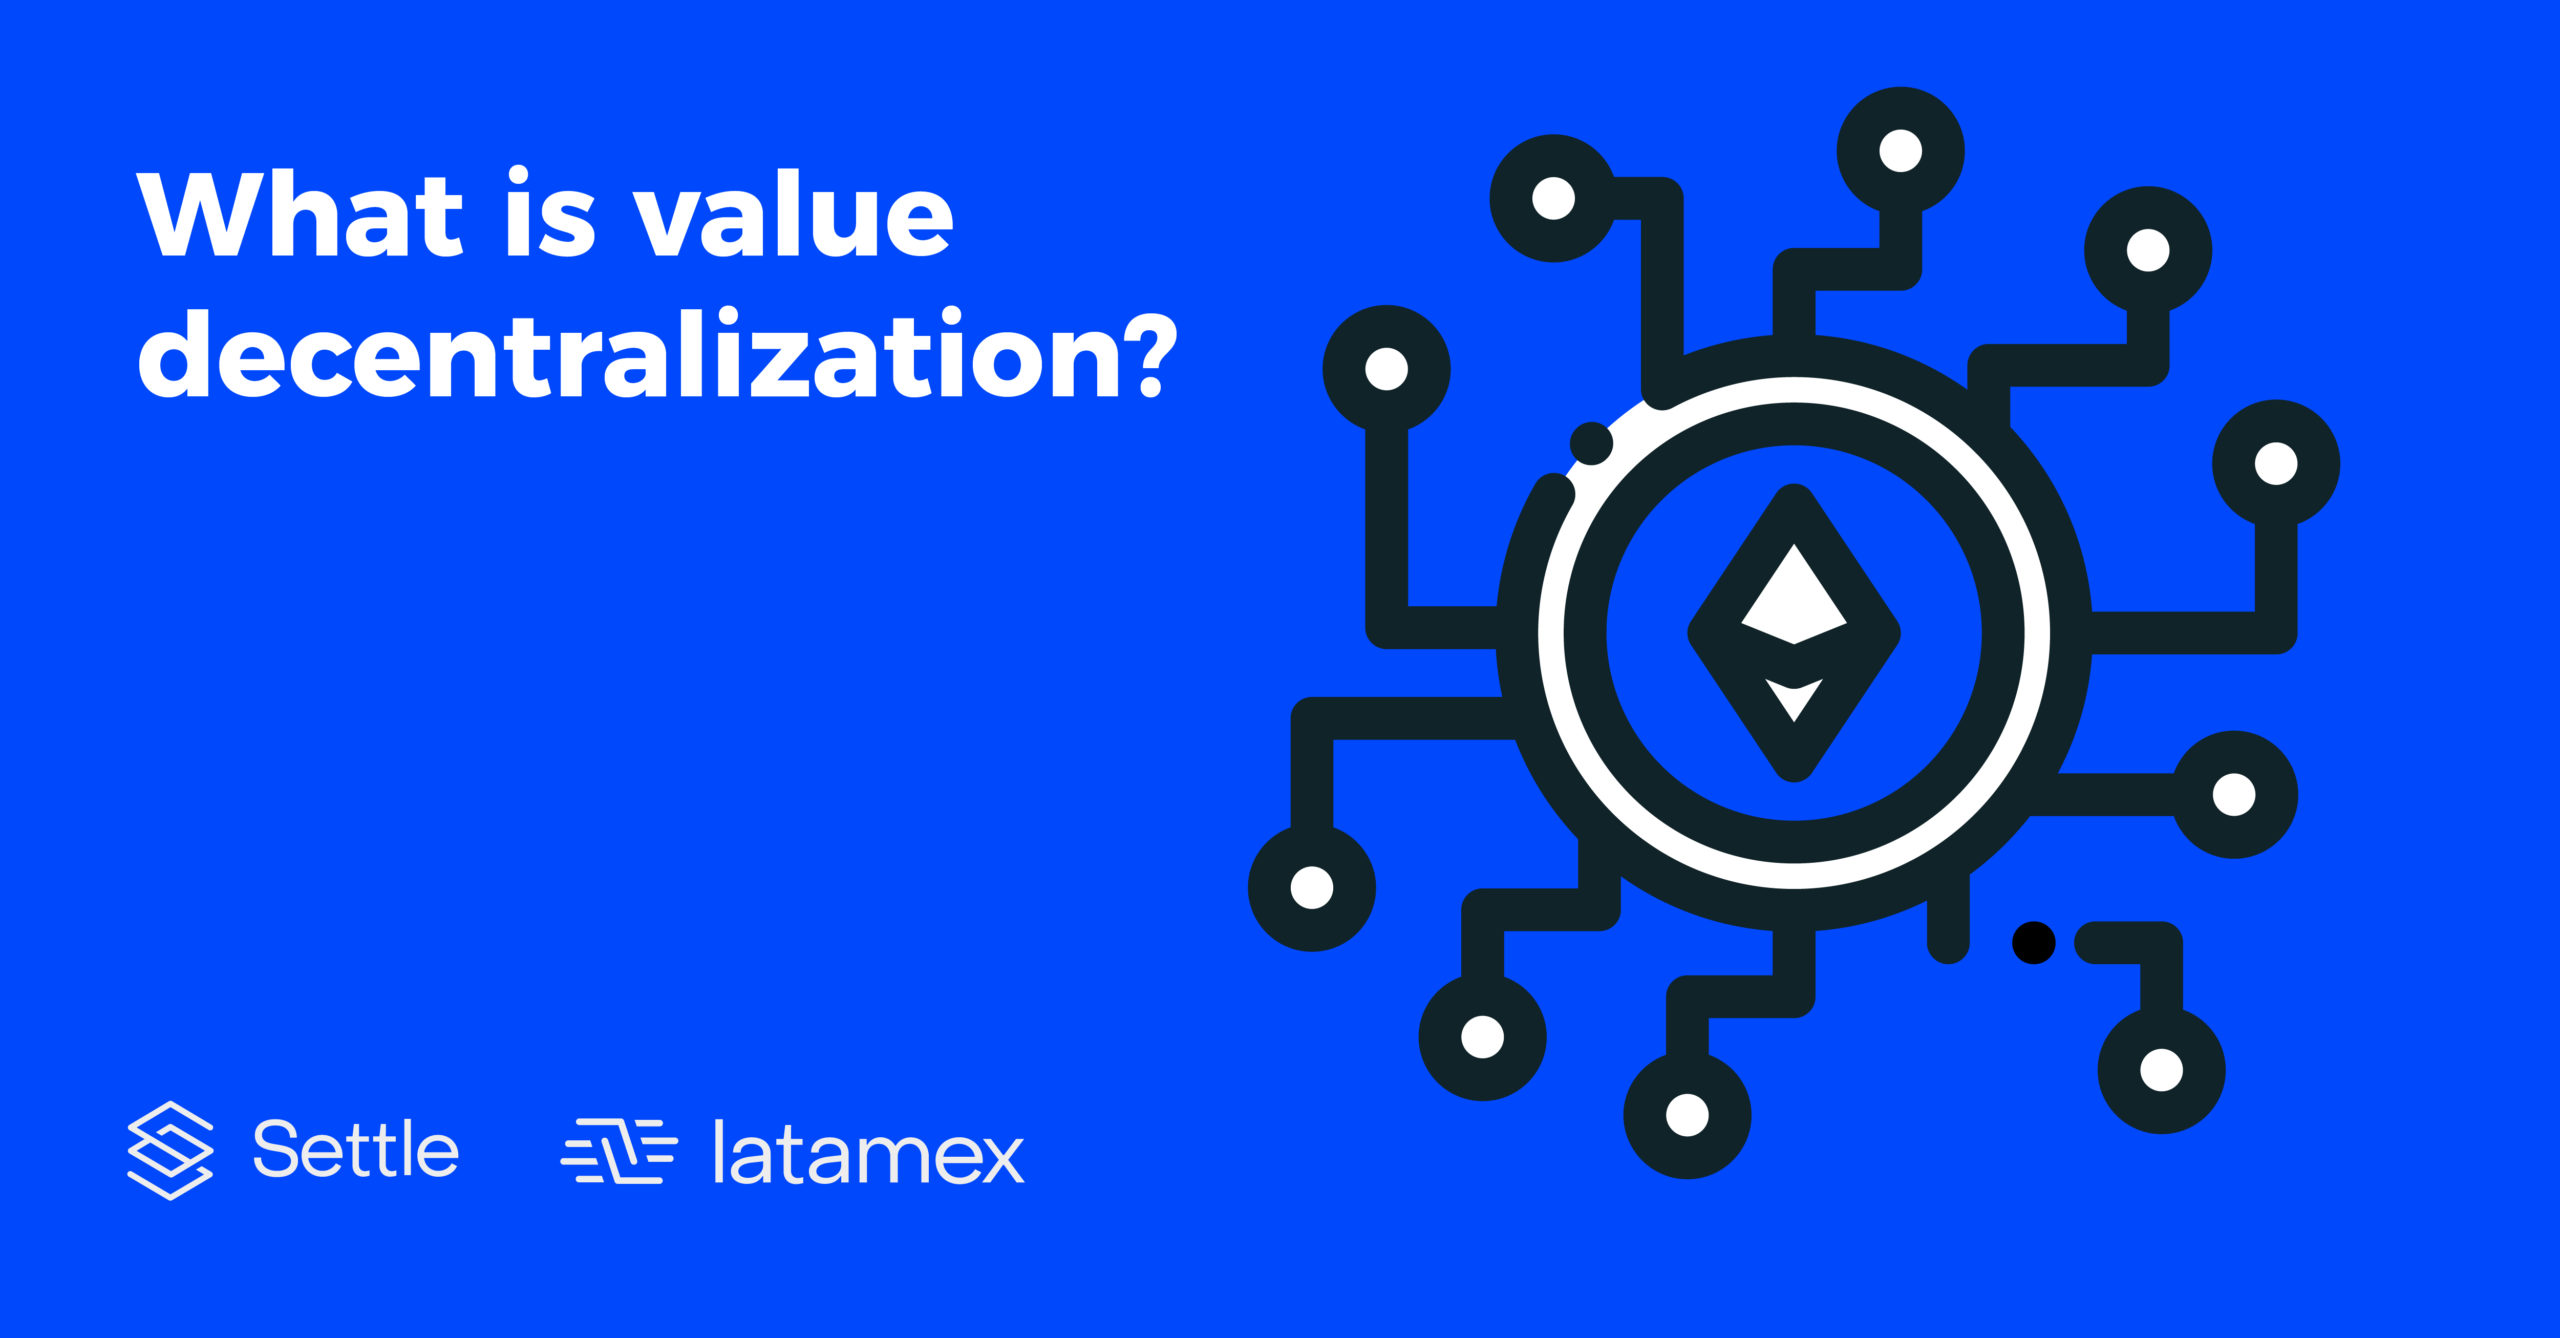 What is value decentralization?